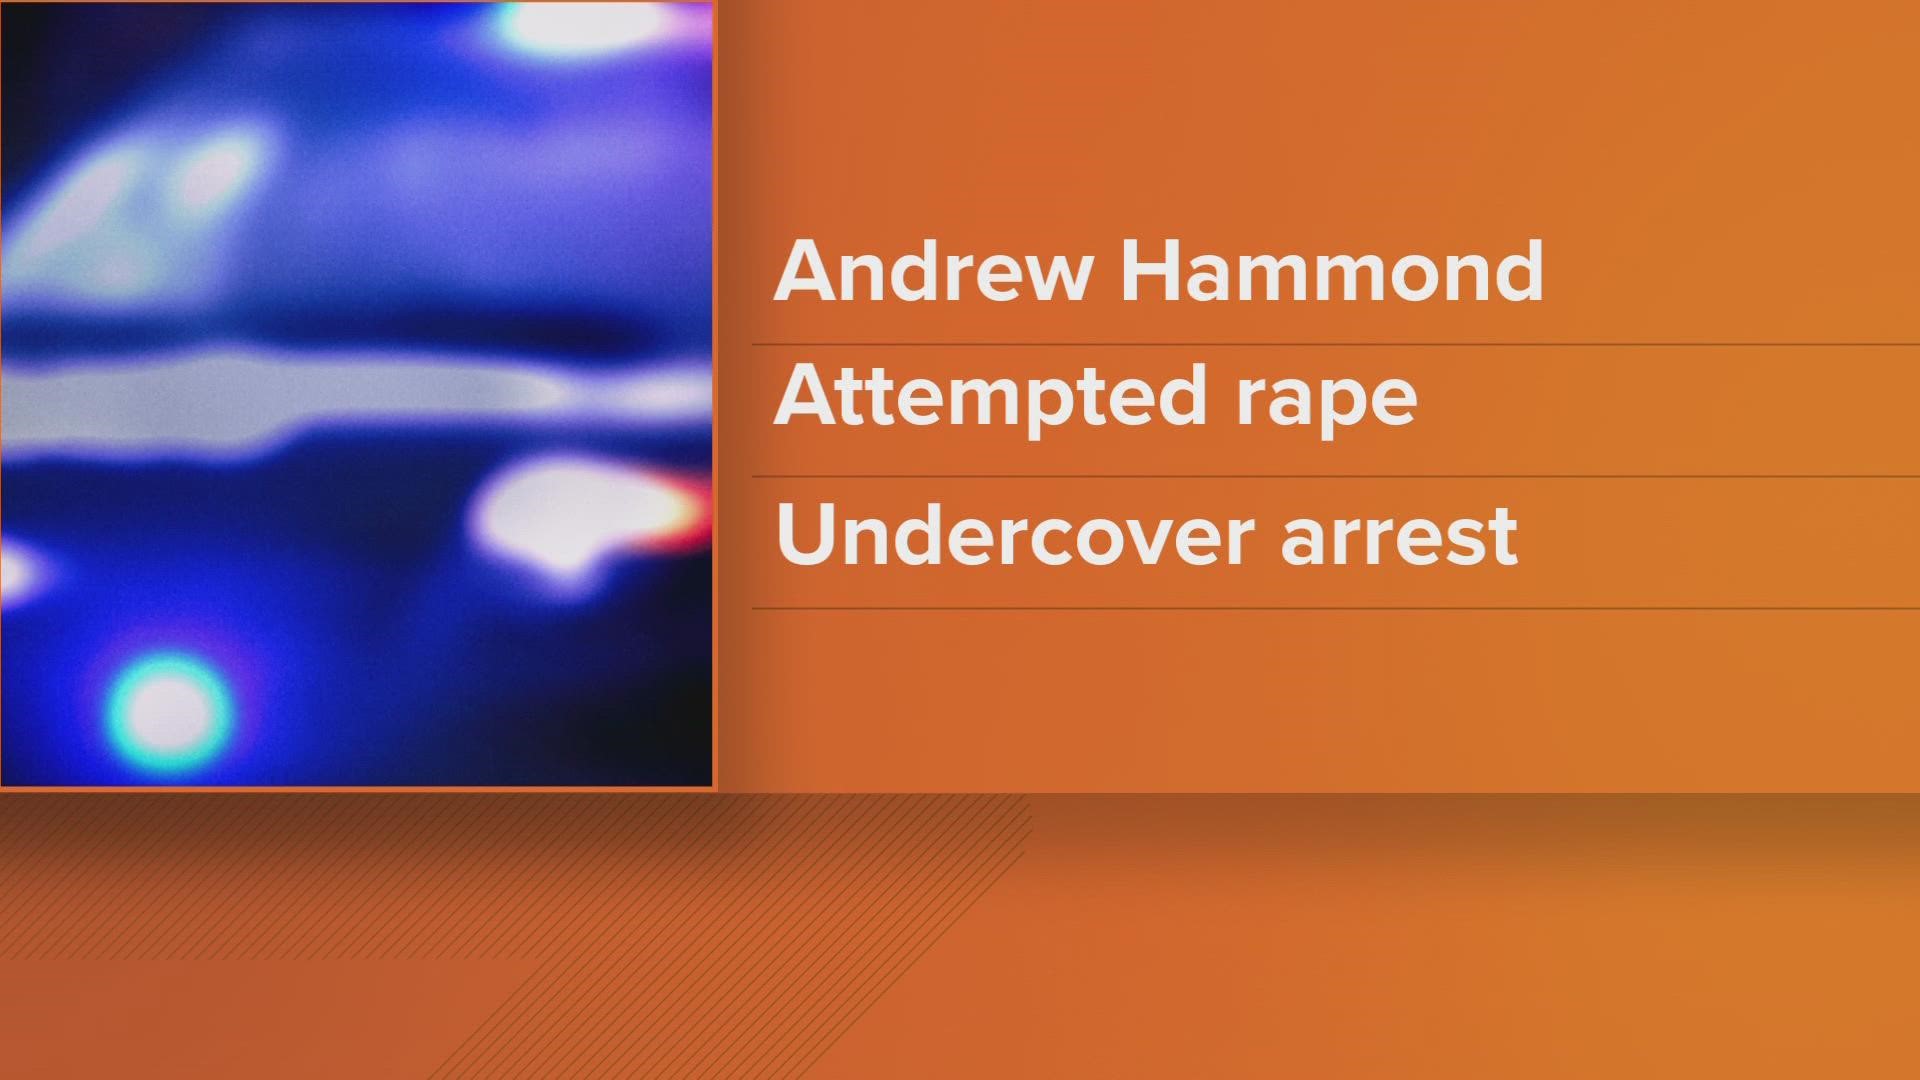 Police said Andrew Hammond, 50, tried to meet up with two children ages 13 and 14 to engage in sexual activity at a hotel in Redmond